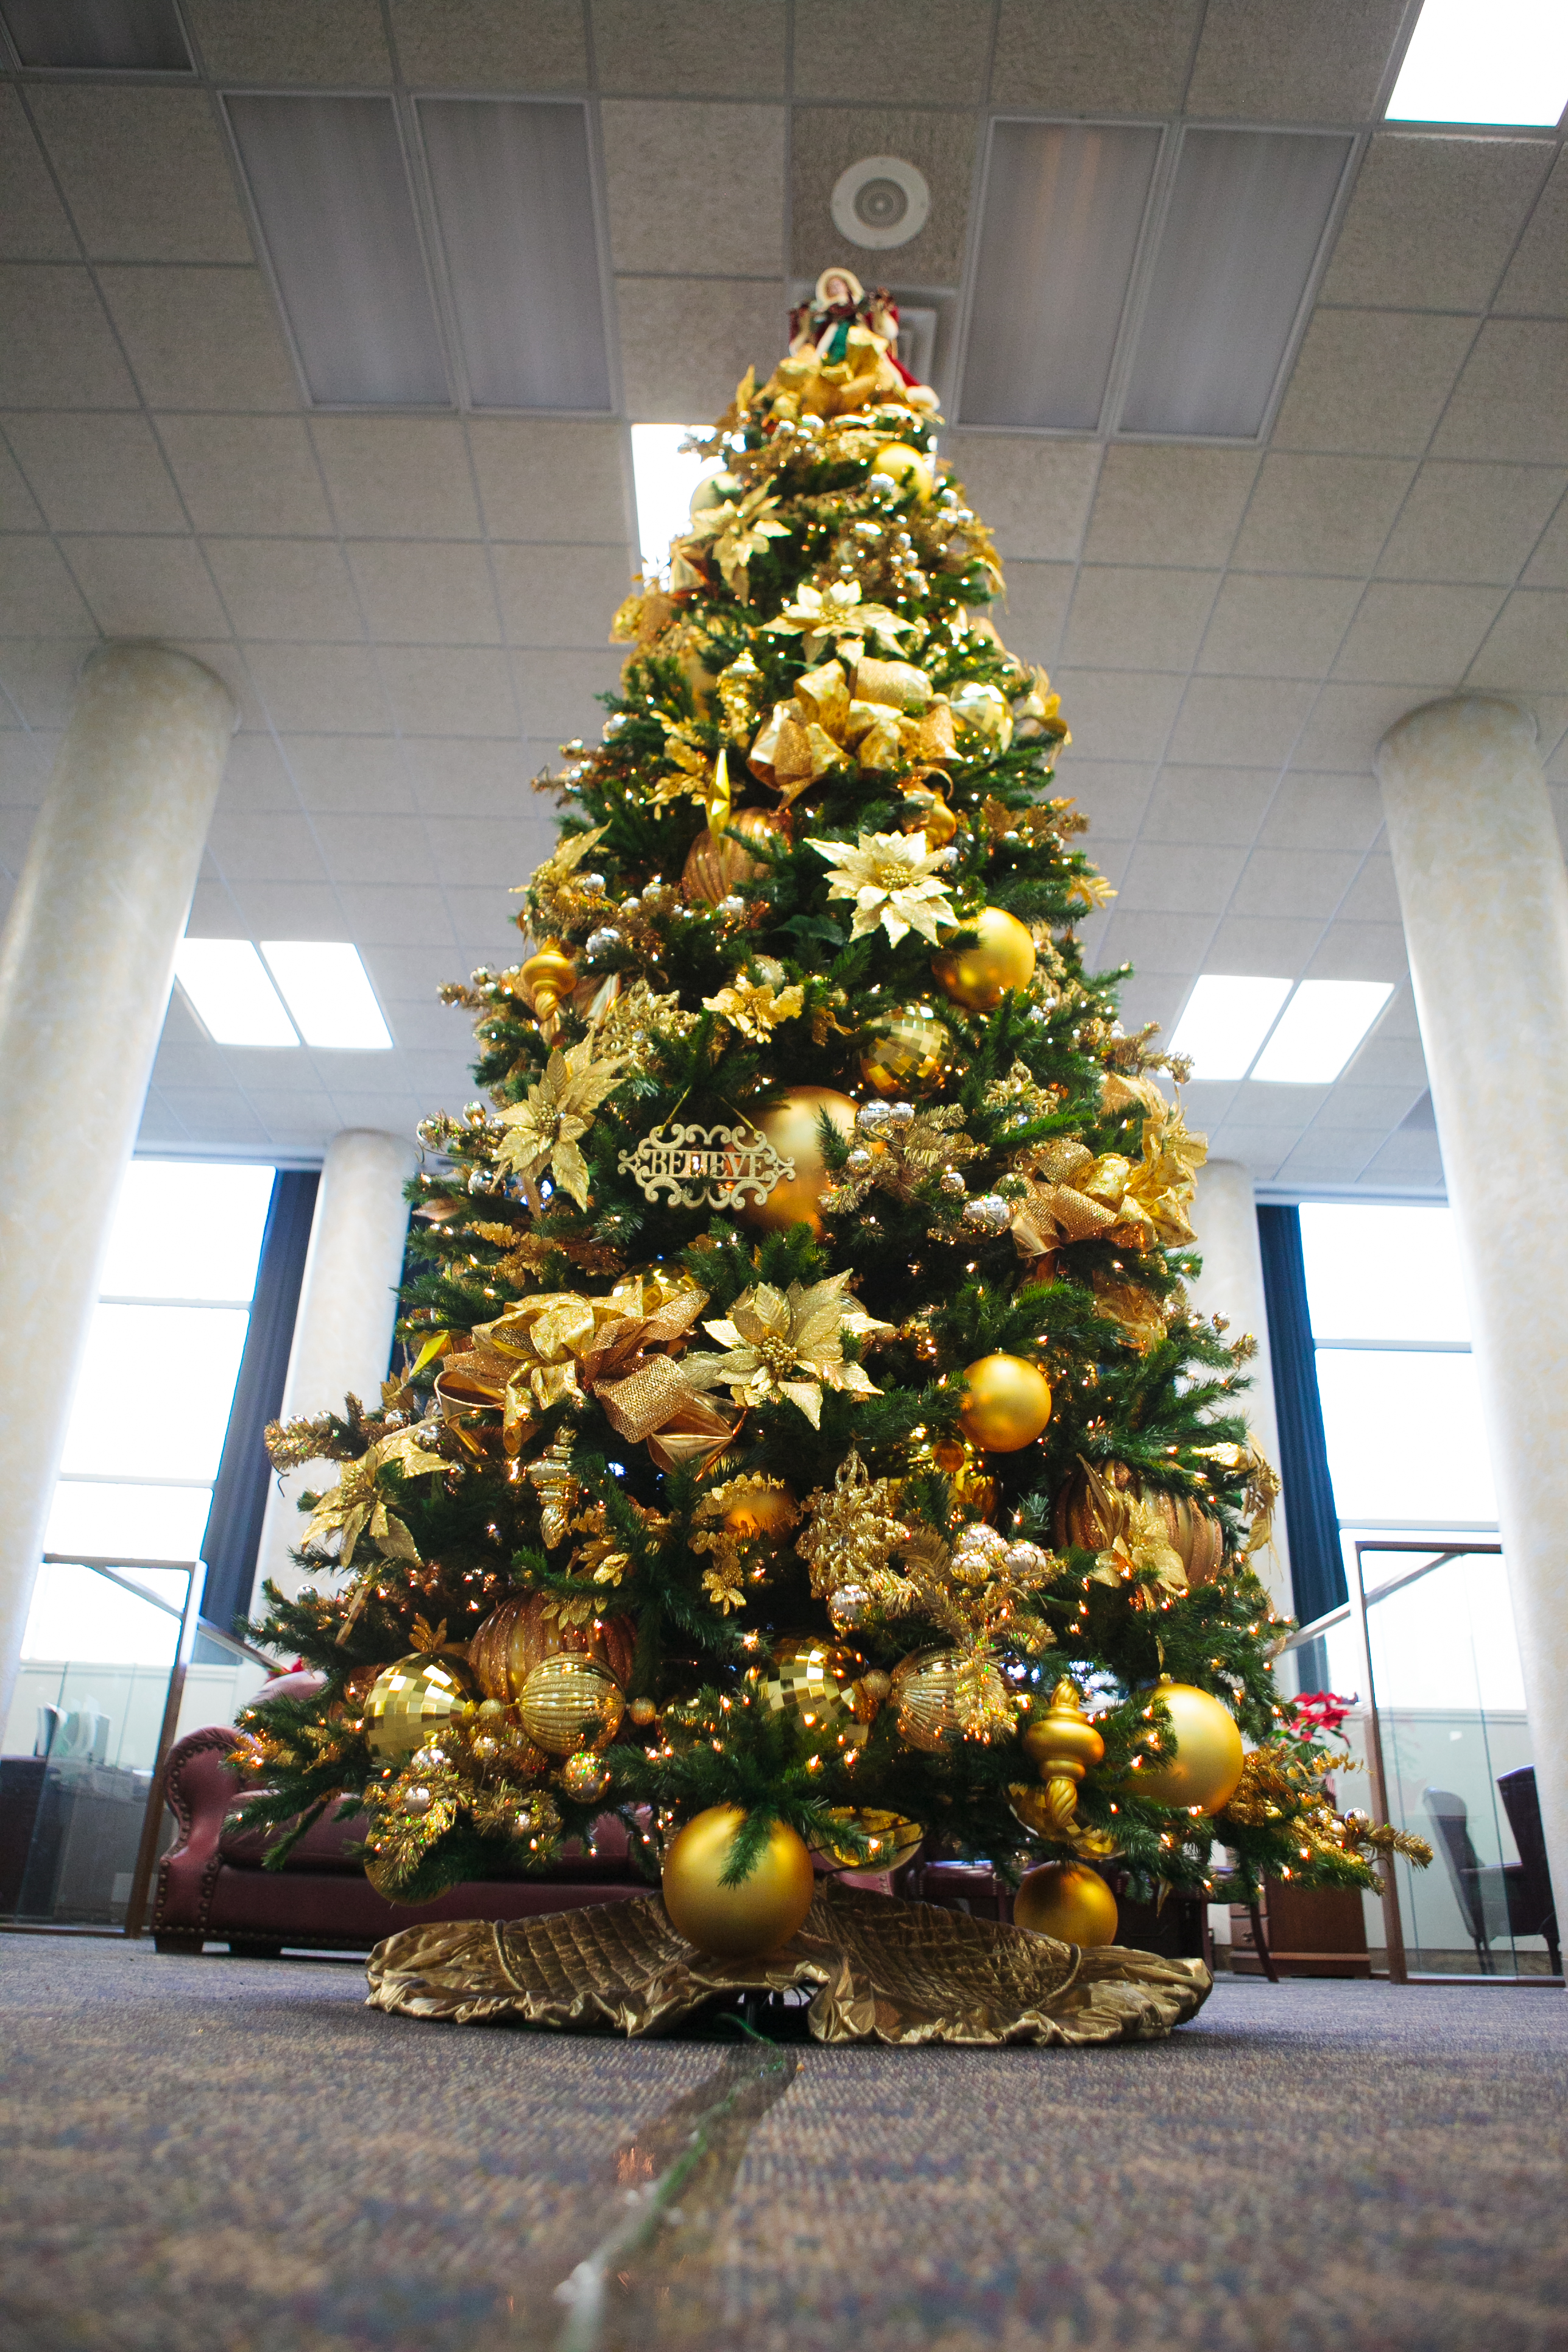 Decorate Your Christmas Tree With Special Themes